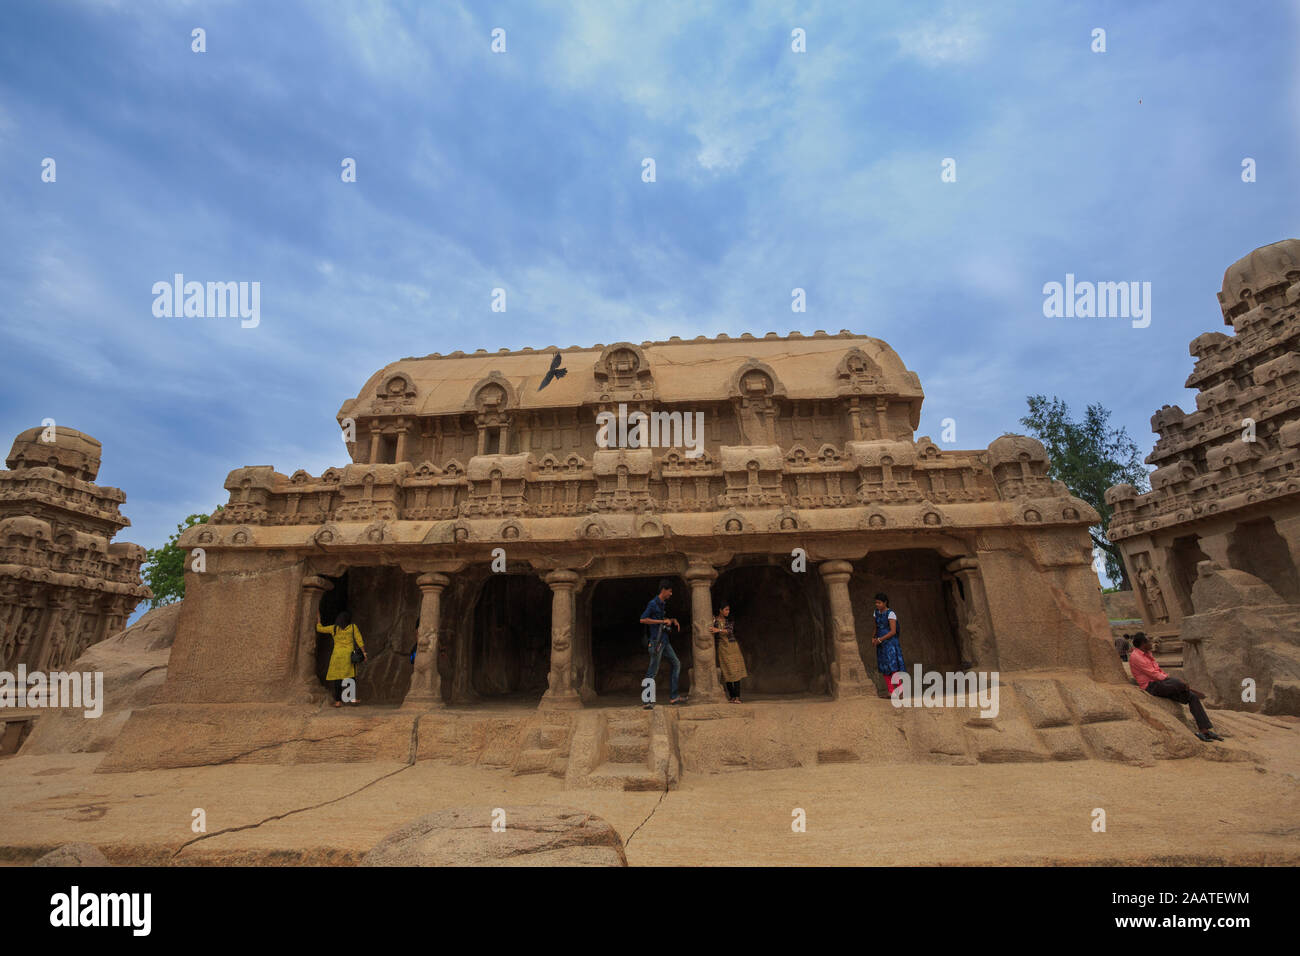 Five Rathas (Pancha Rathas) - The famous temple of Mahabalipuram (India). The structure is made of monolithic stone. Stock Photo